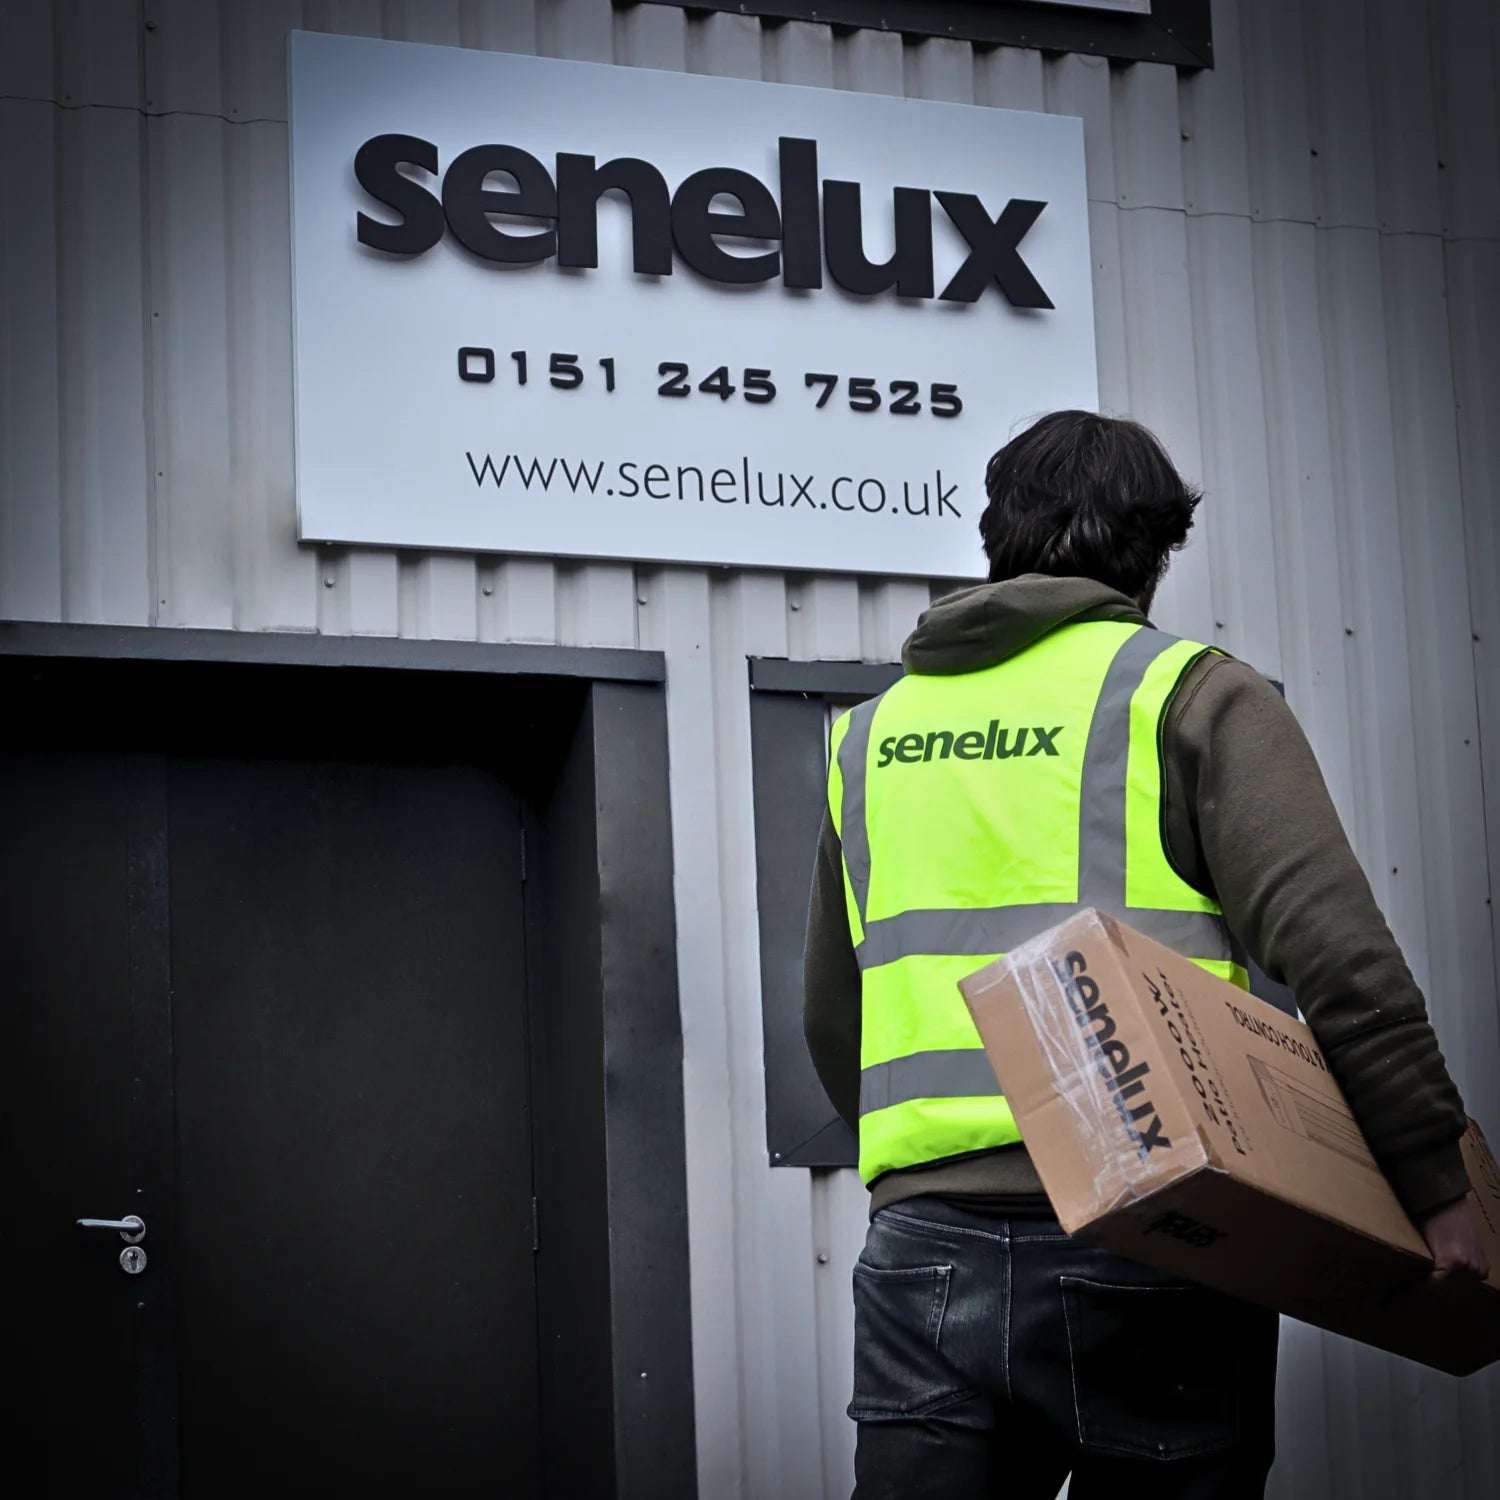 A picture of a man in a Senelux high visibility jacket carrying a Senelux parcel in front of a Senelux sign